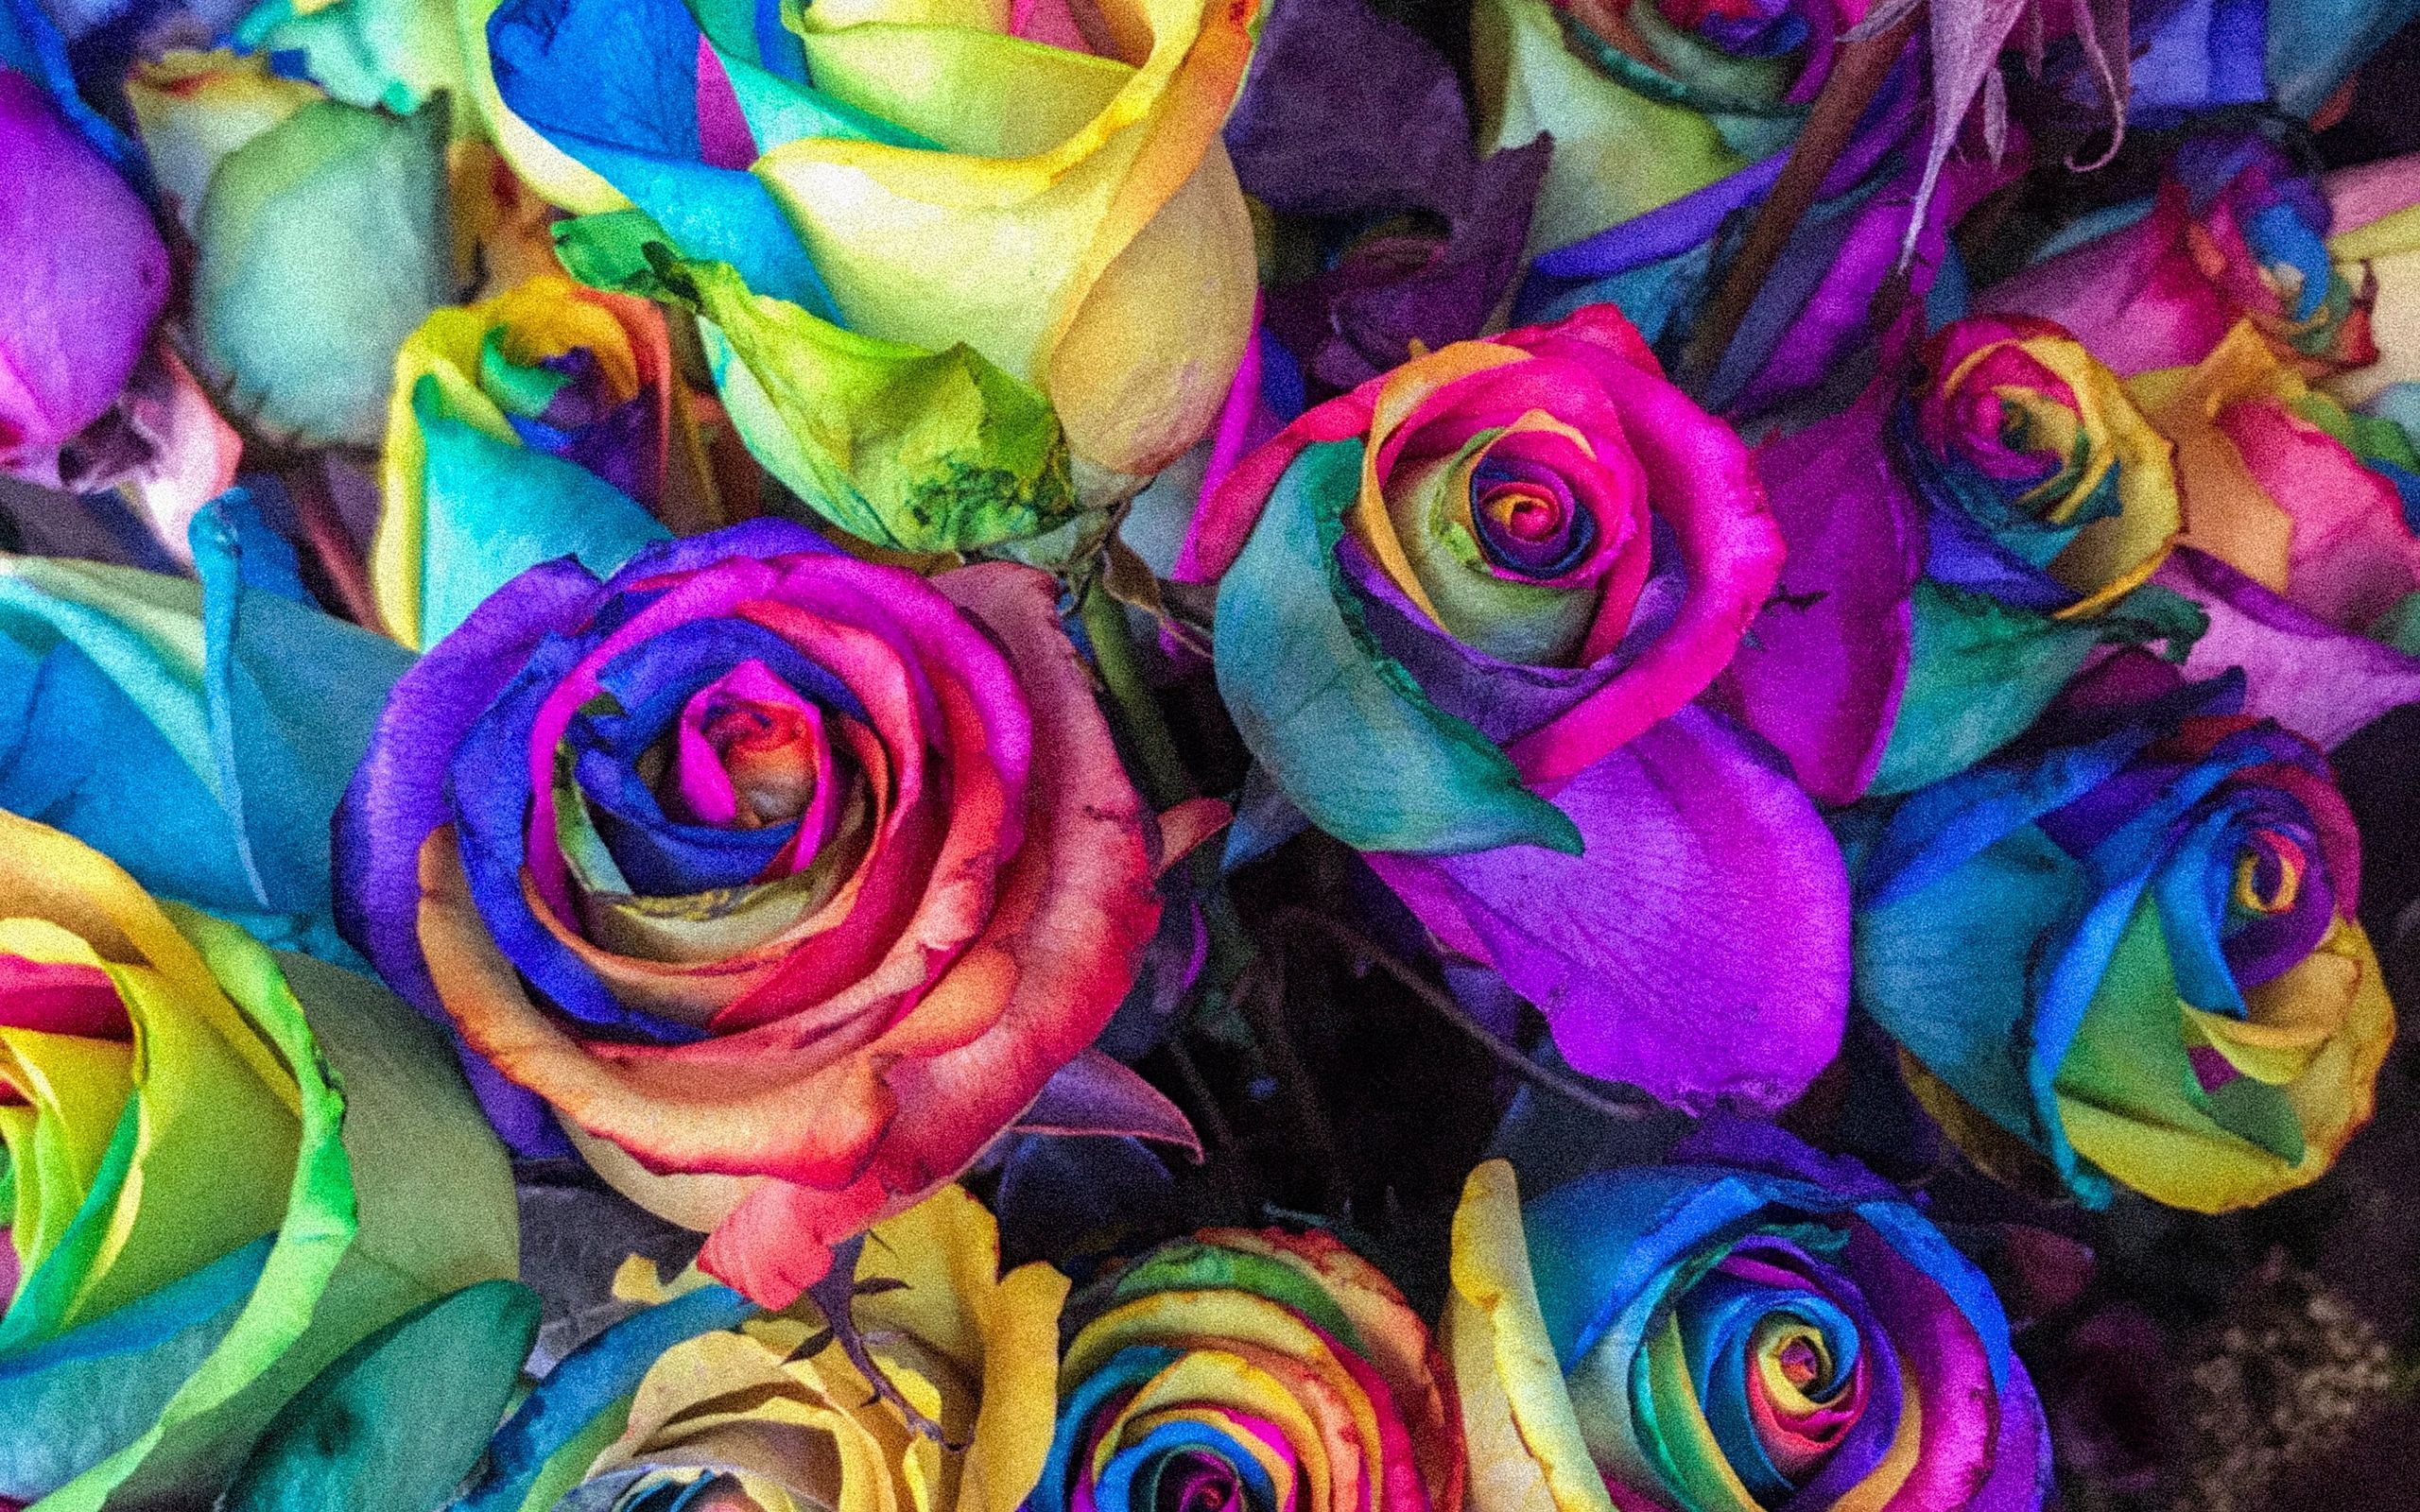 Download wallpaper 2560x1600 roses, colorful, bouquet, colourful